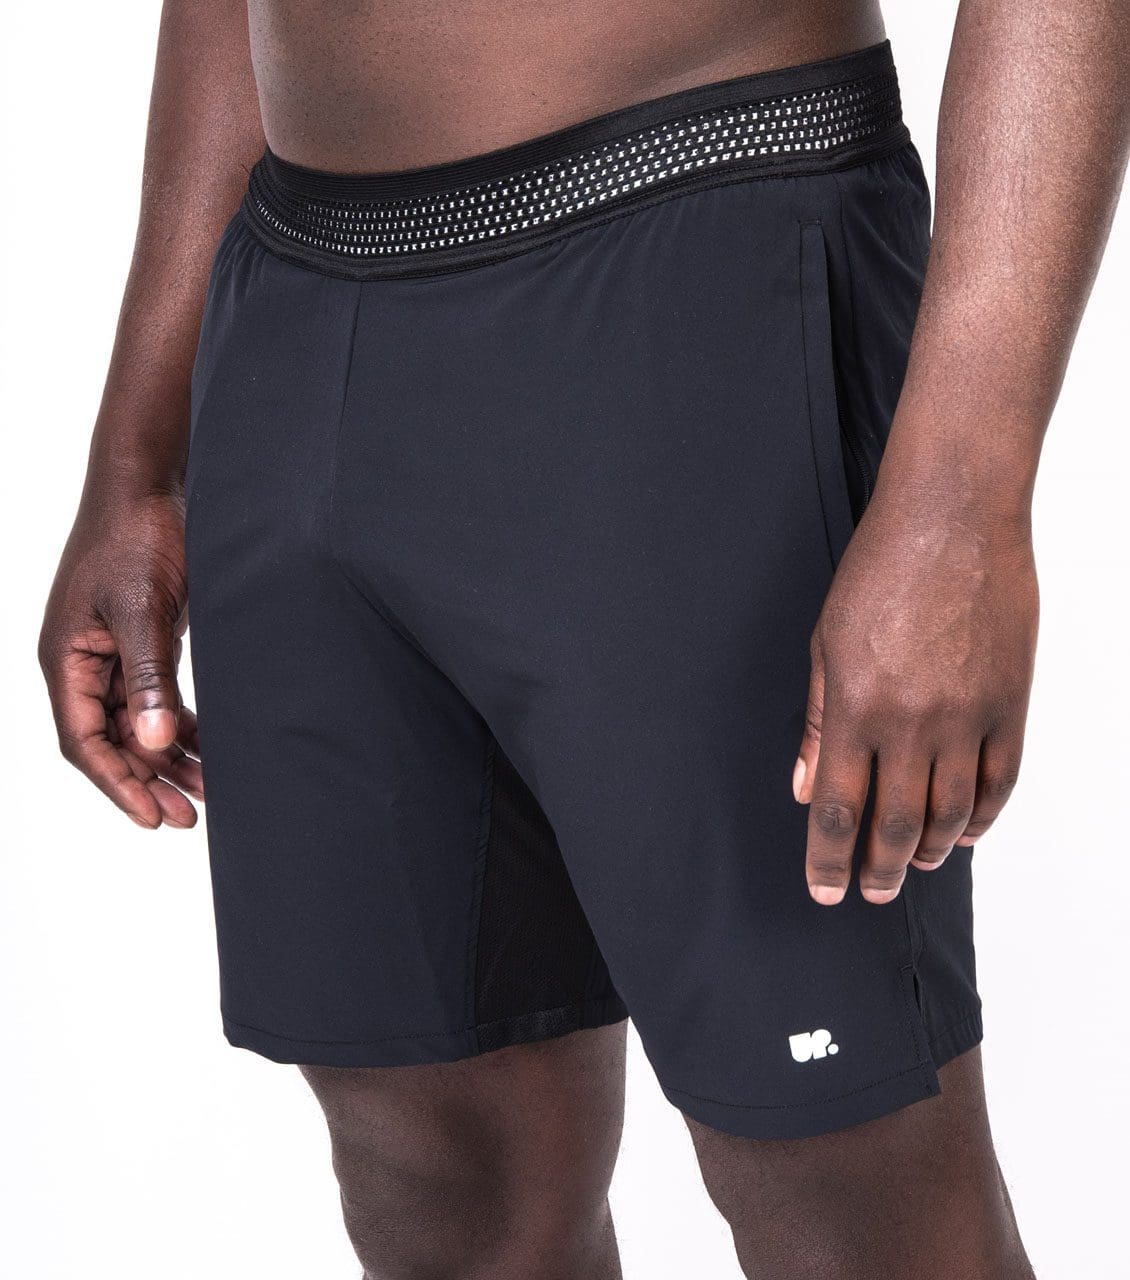 Seamless Athletic Shorts - Grey - Live Fit. Apparel